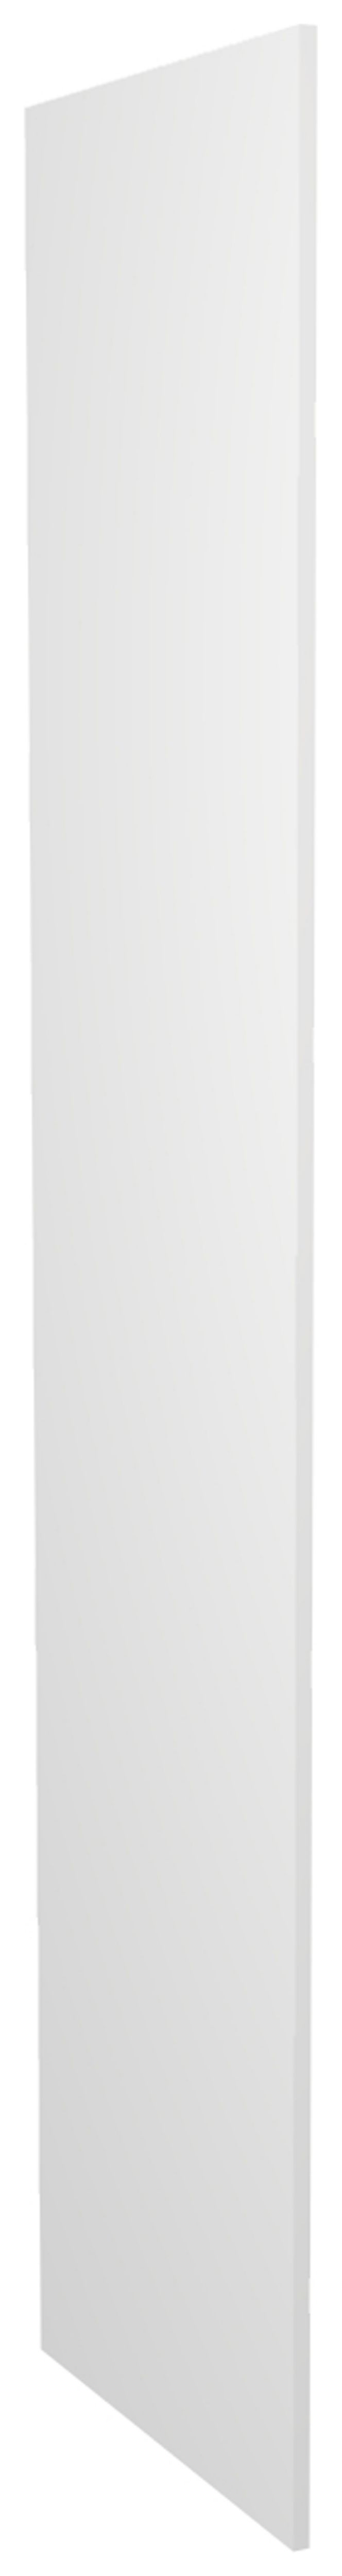 Image of Wickes Vermont Gloss White Tower Decor End Panel - 18mm